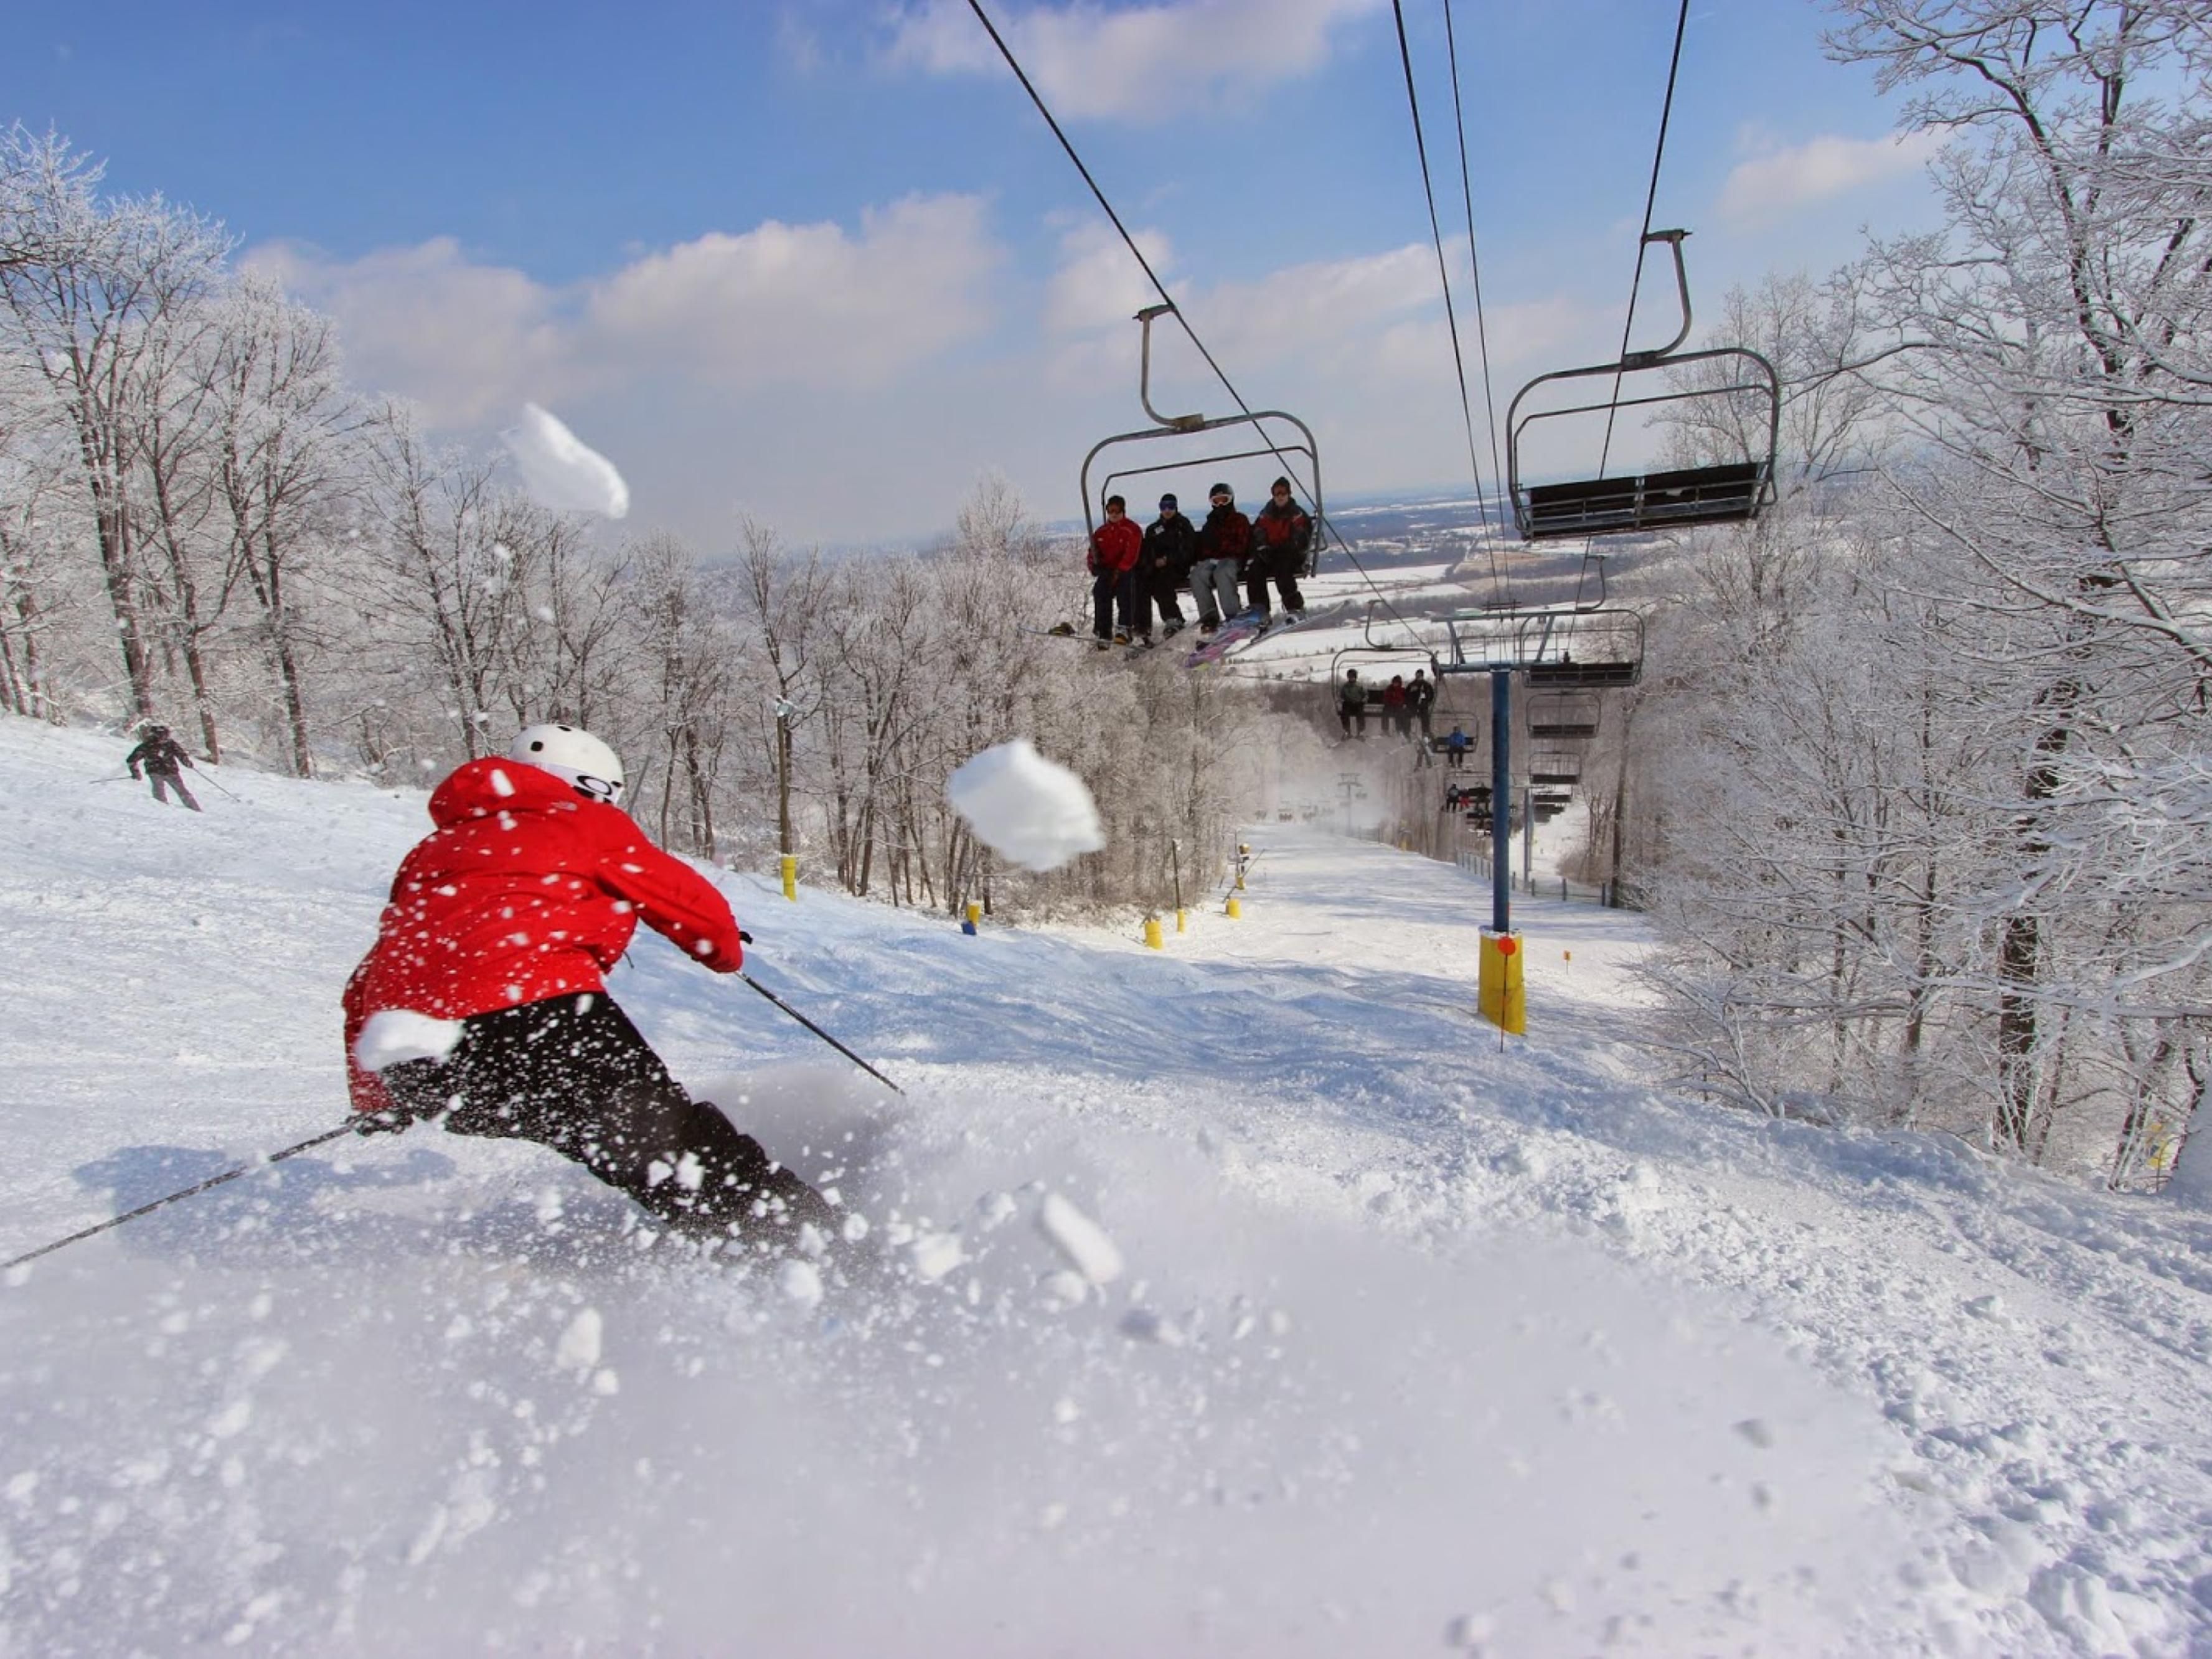 Roundtop Mountain Special Rates